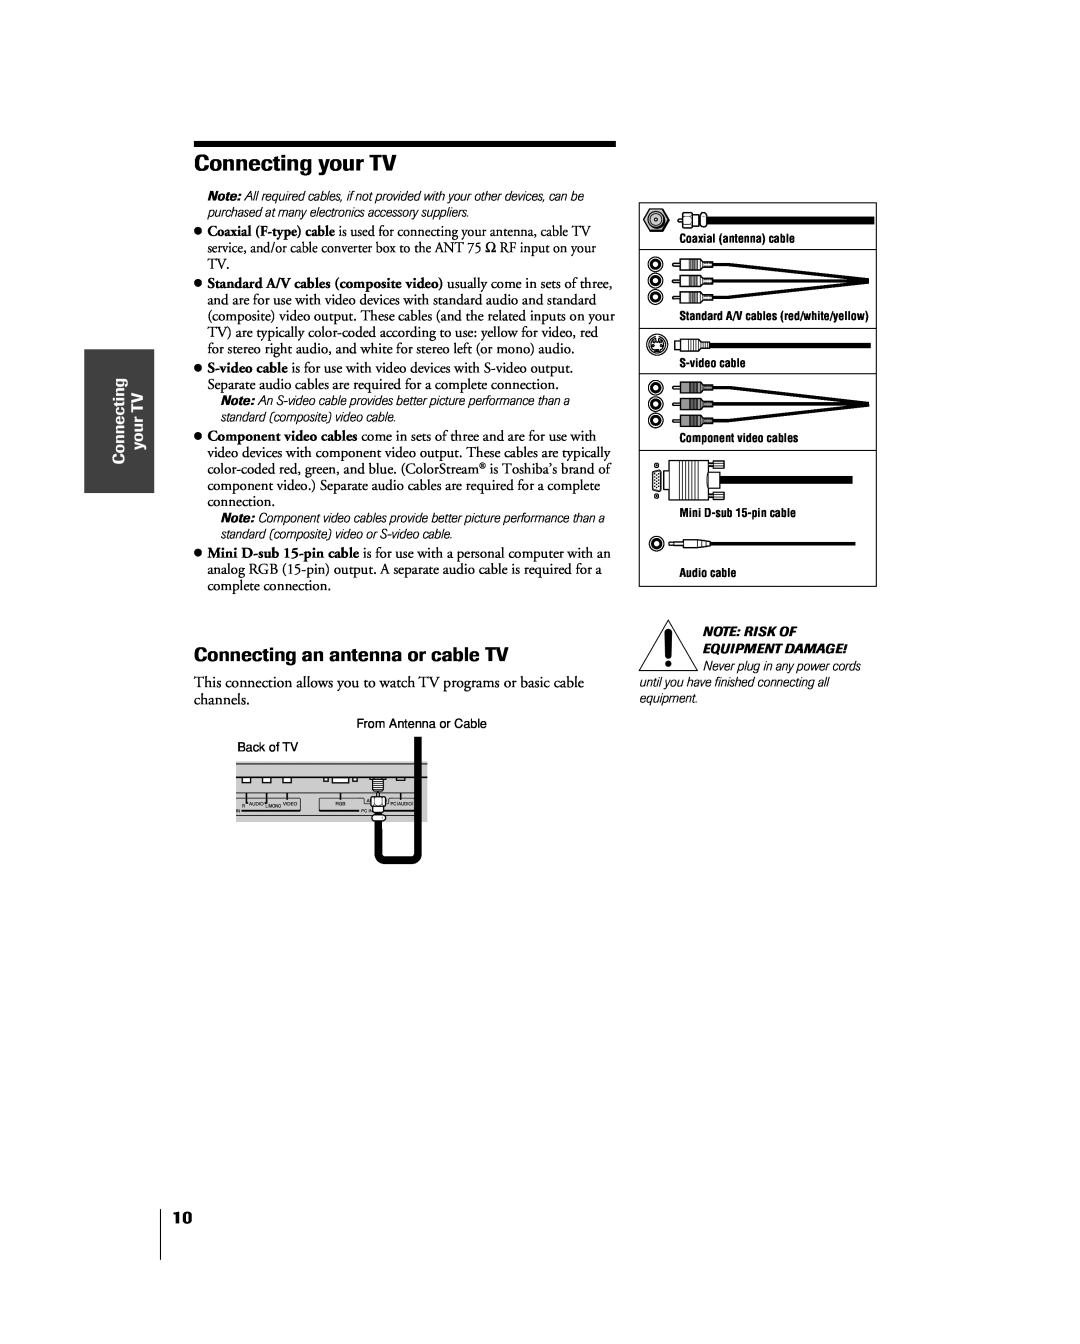 Toshiba 20DL15, 15DL15 owner manual Connecting your TV, Connecting an antenna or cable TV 